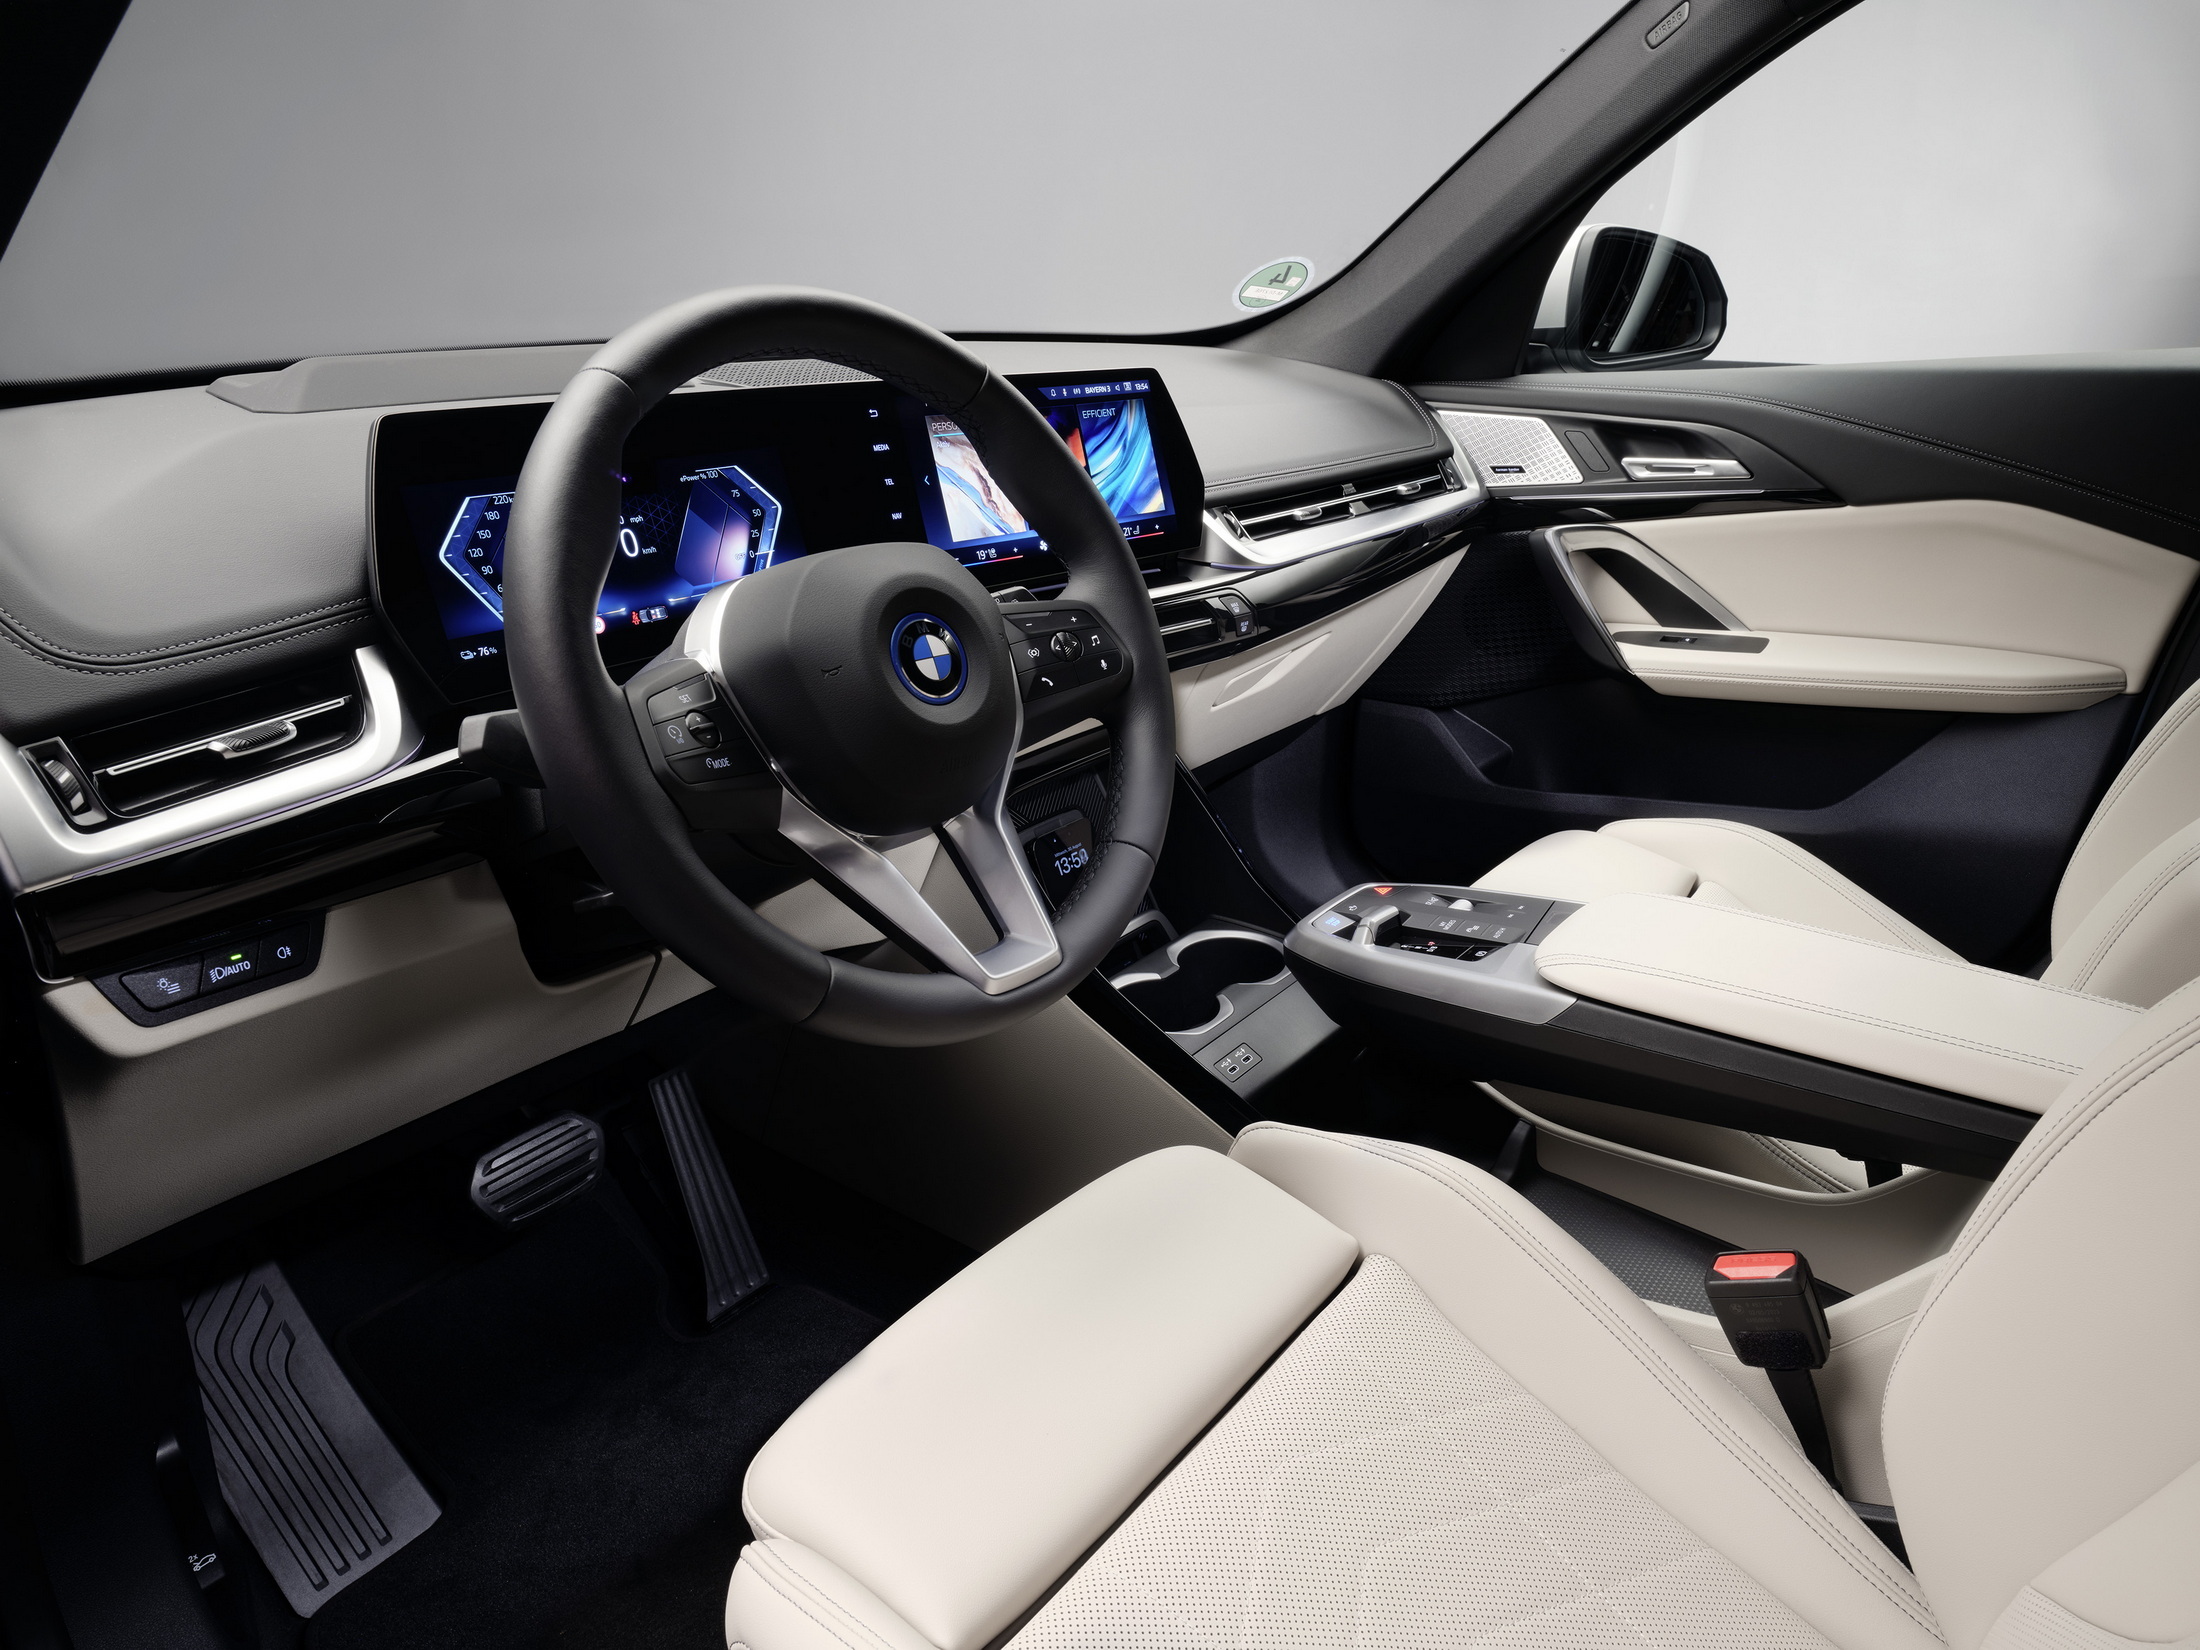 BMW iX1 eDrive20 Is An Entry-Level FWD EV With Up To 295 Miles Of Range